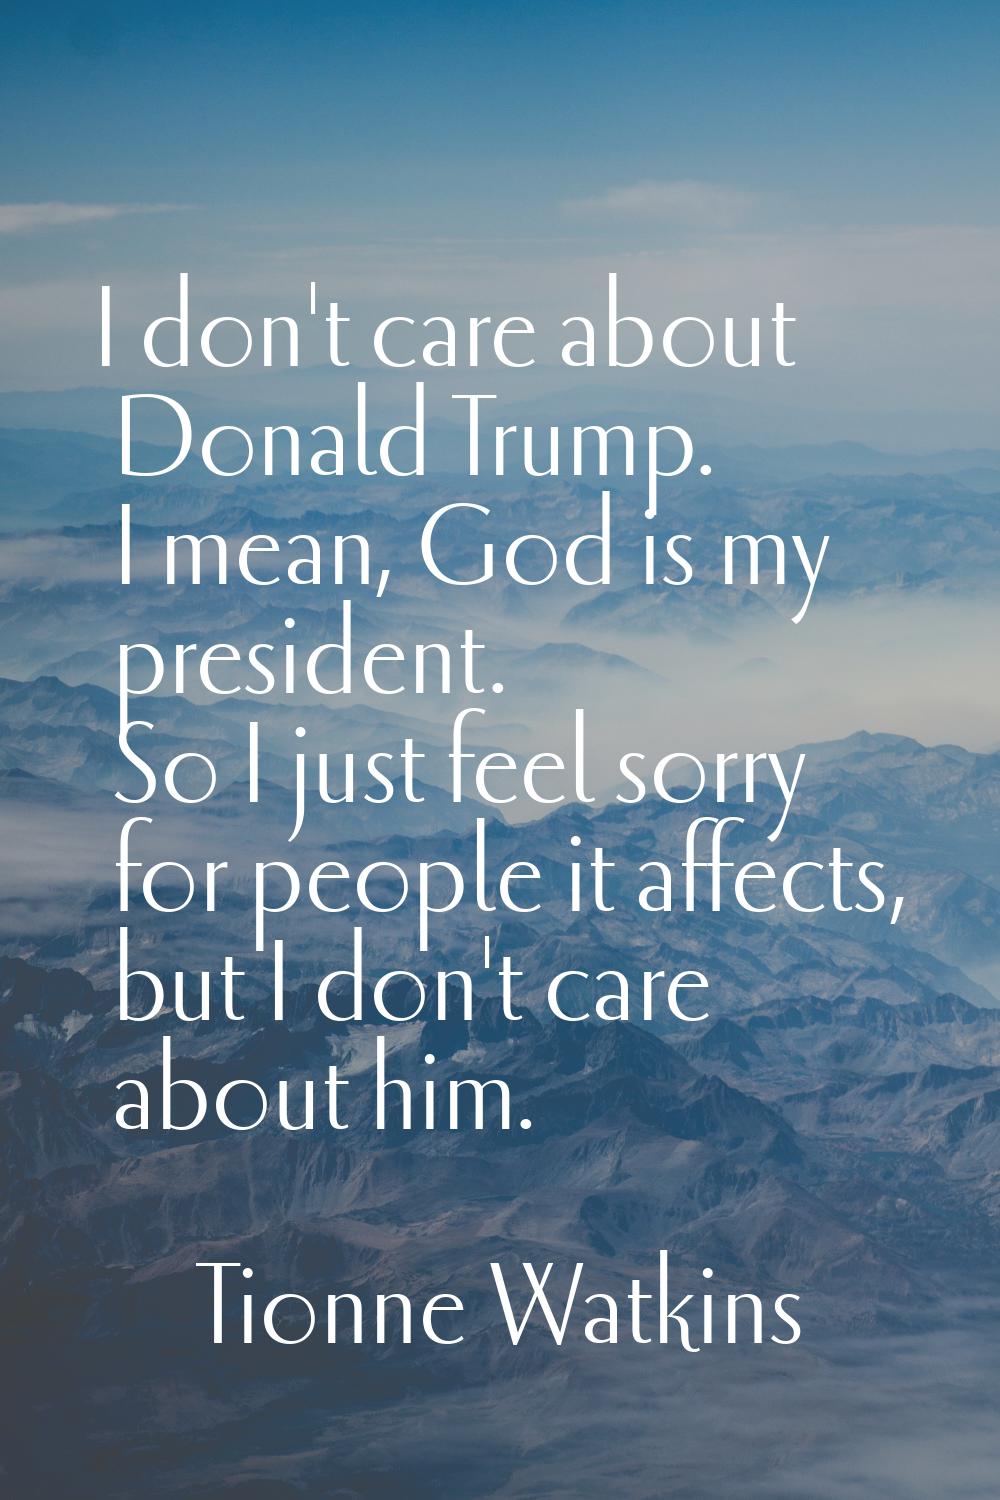 I don't care about Donald Trump. I mean, God is my president. So I just feel sorry for people it af